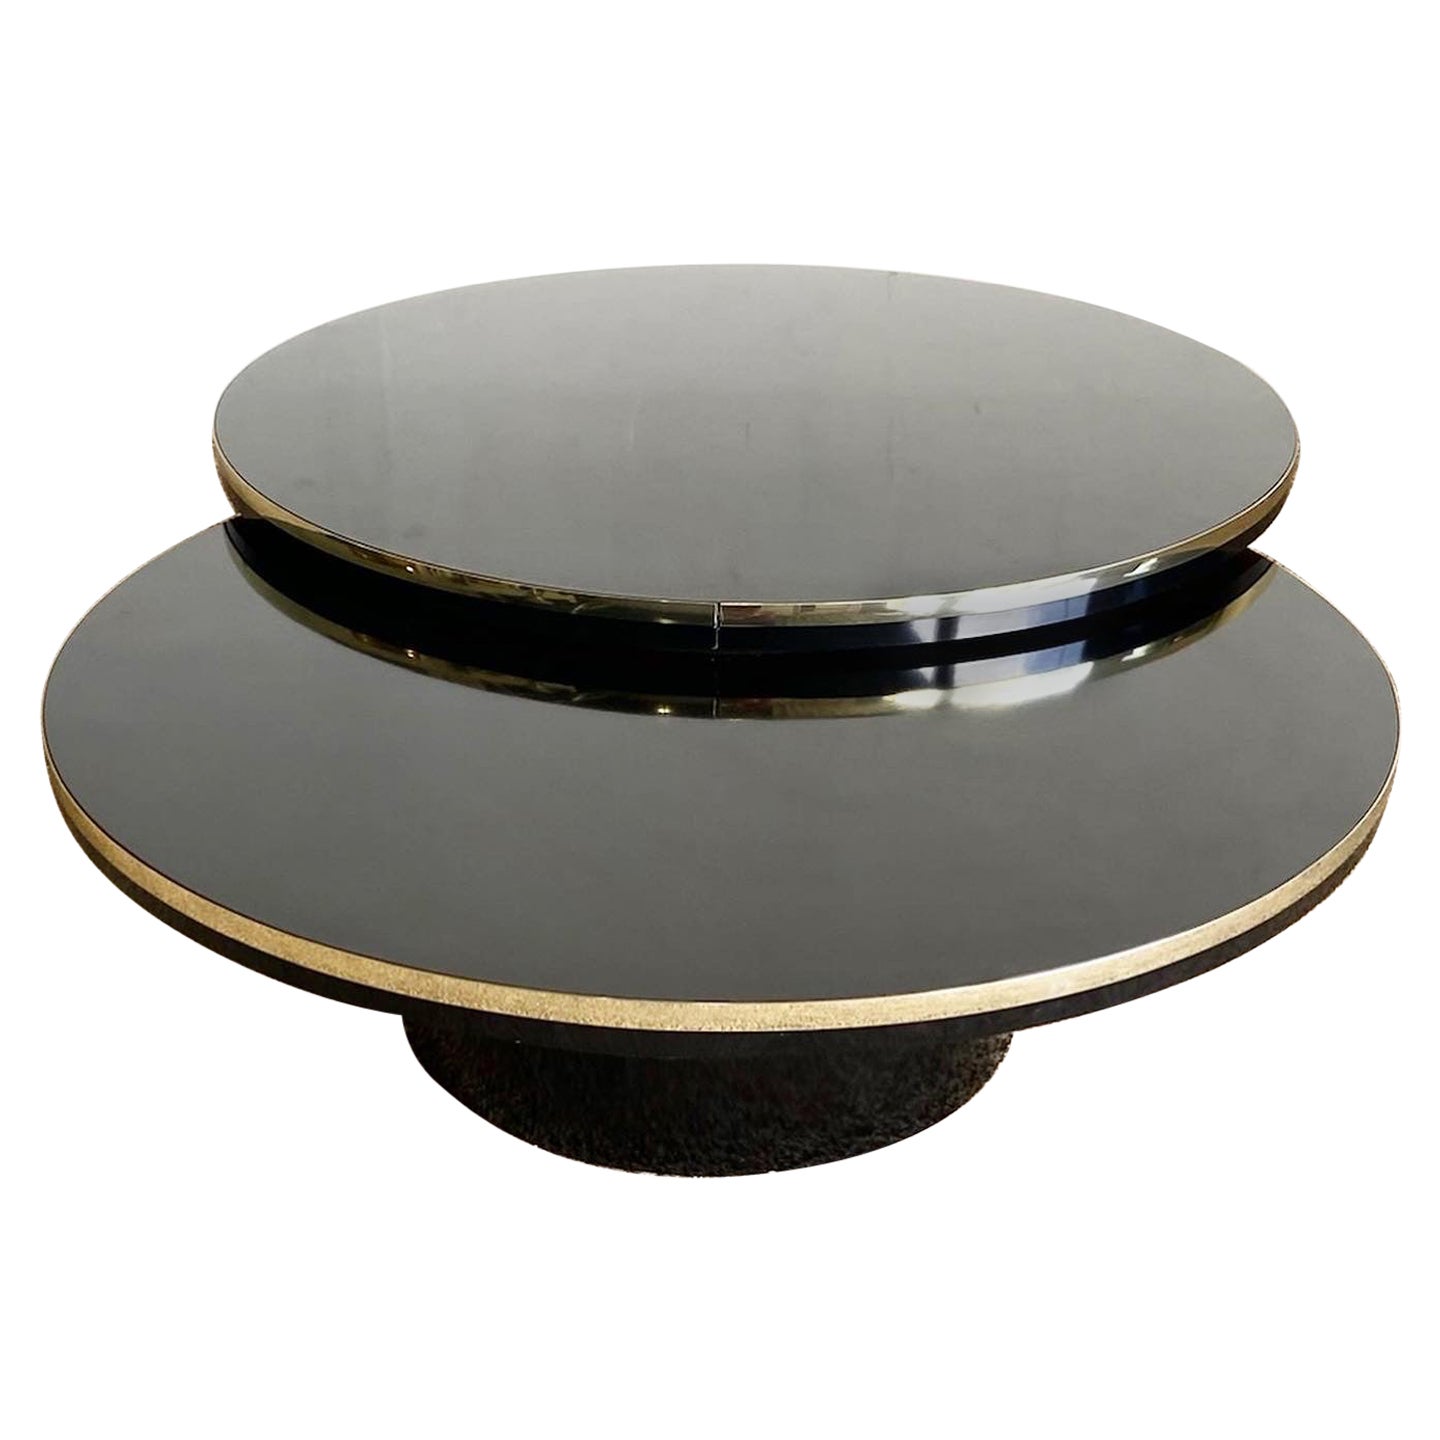 Postmodern Black Lacquer Laminate Two Tier Swivel Coffee Table With Gold Trim For Sale